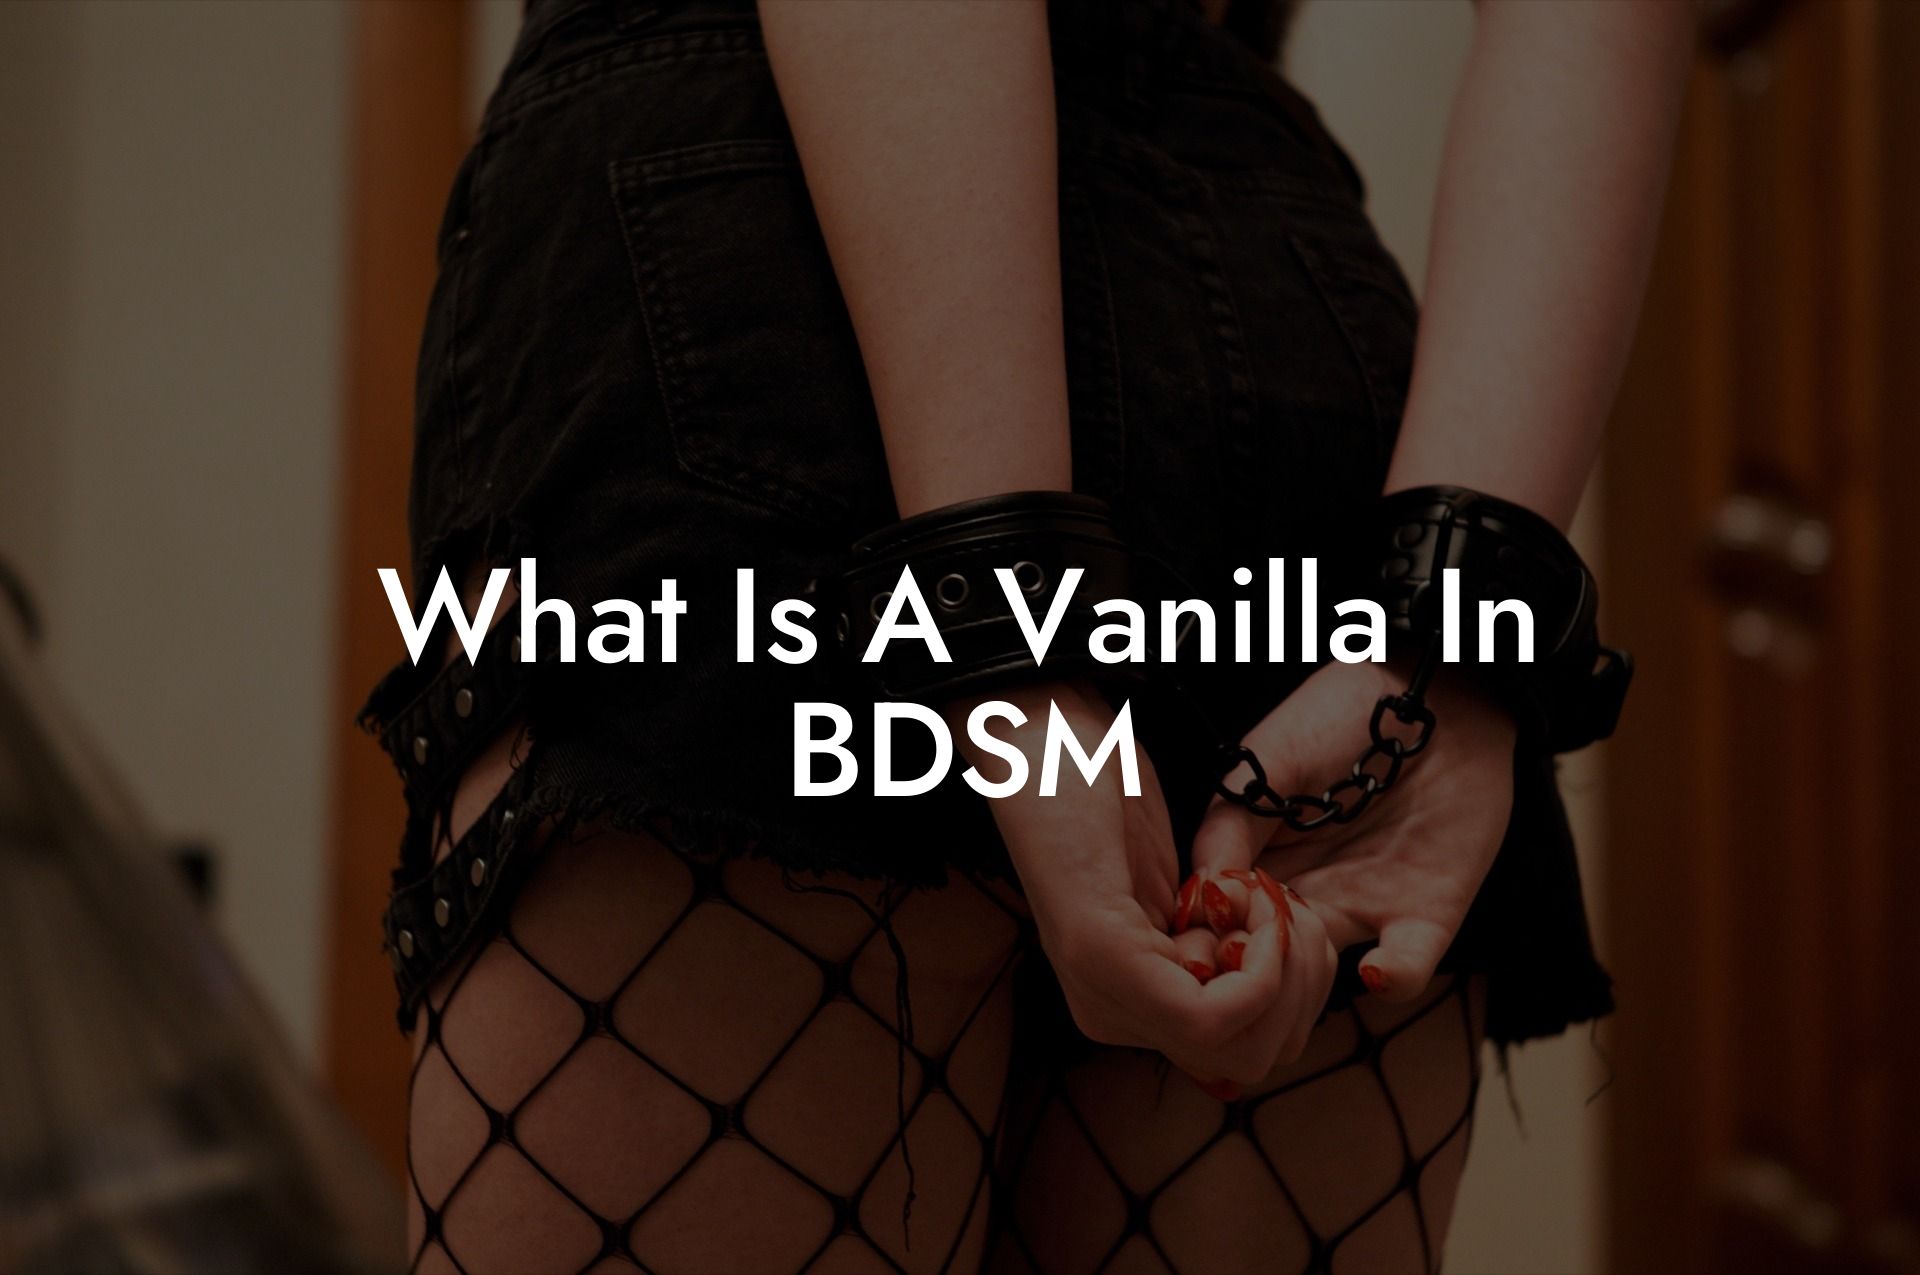 What Is A Vanilla In BDSM